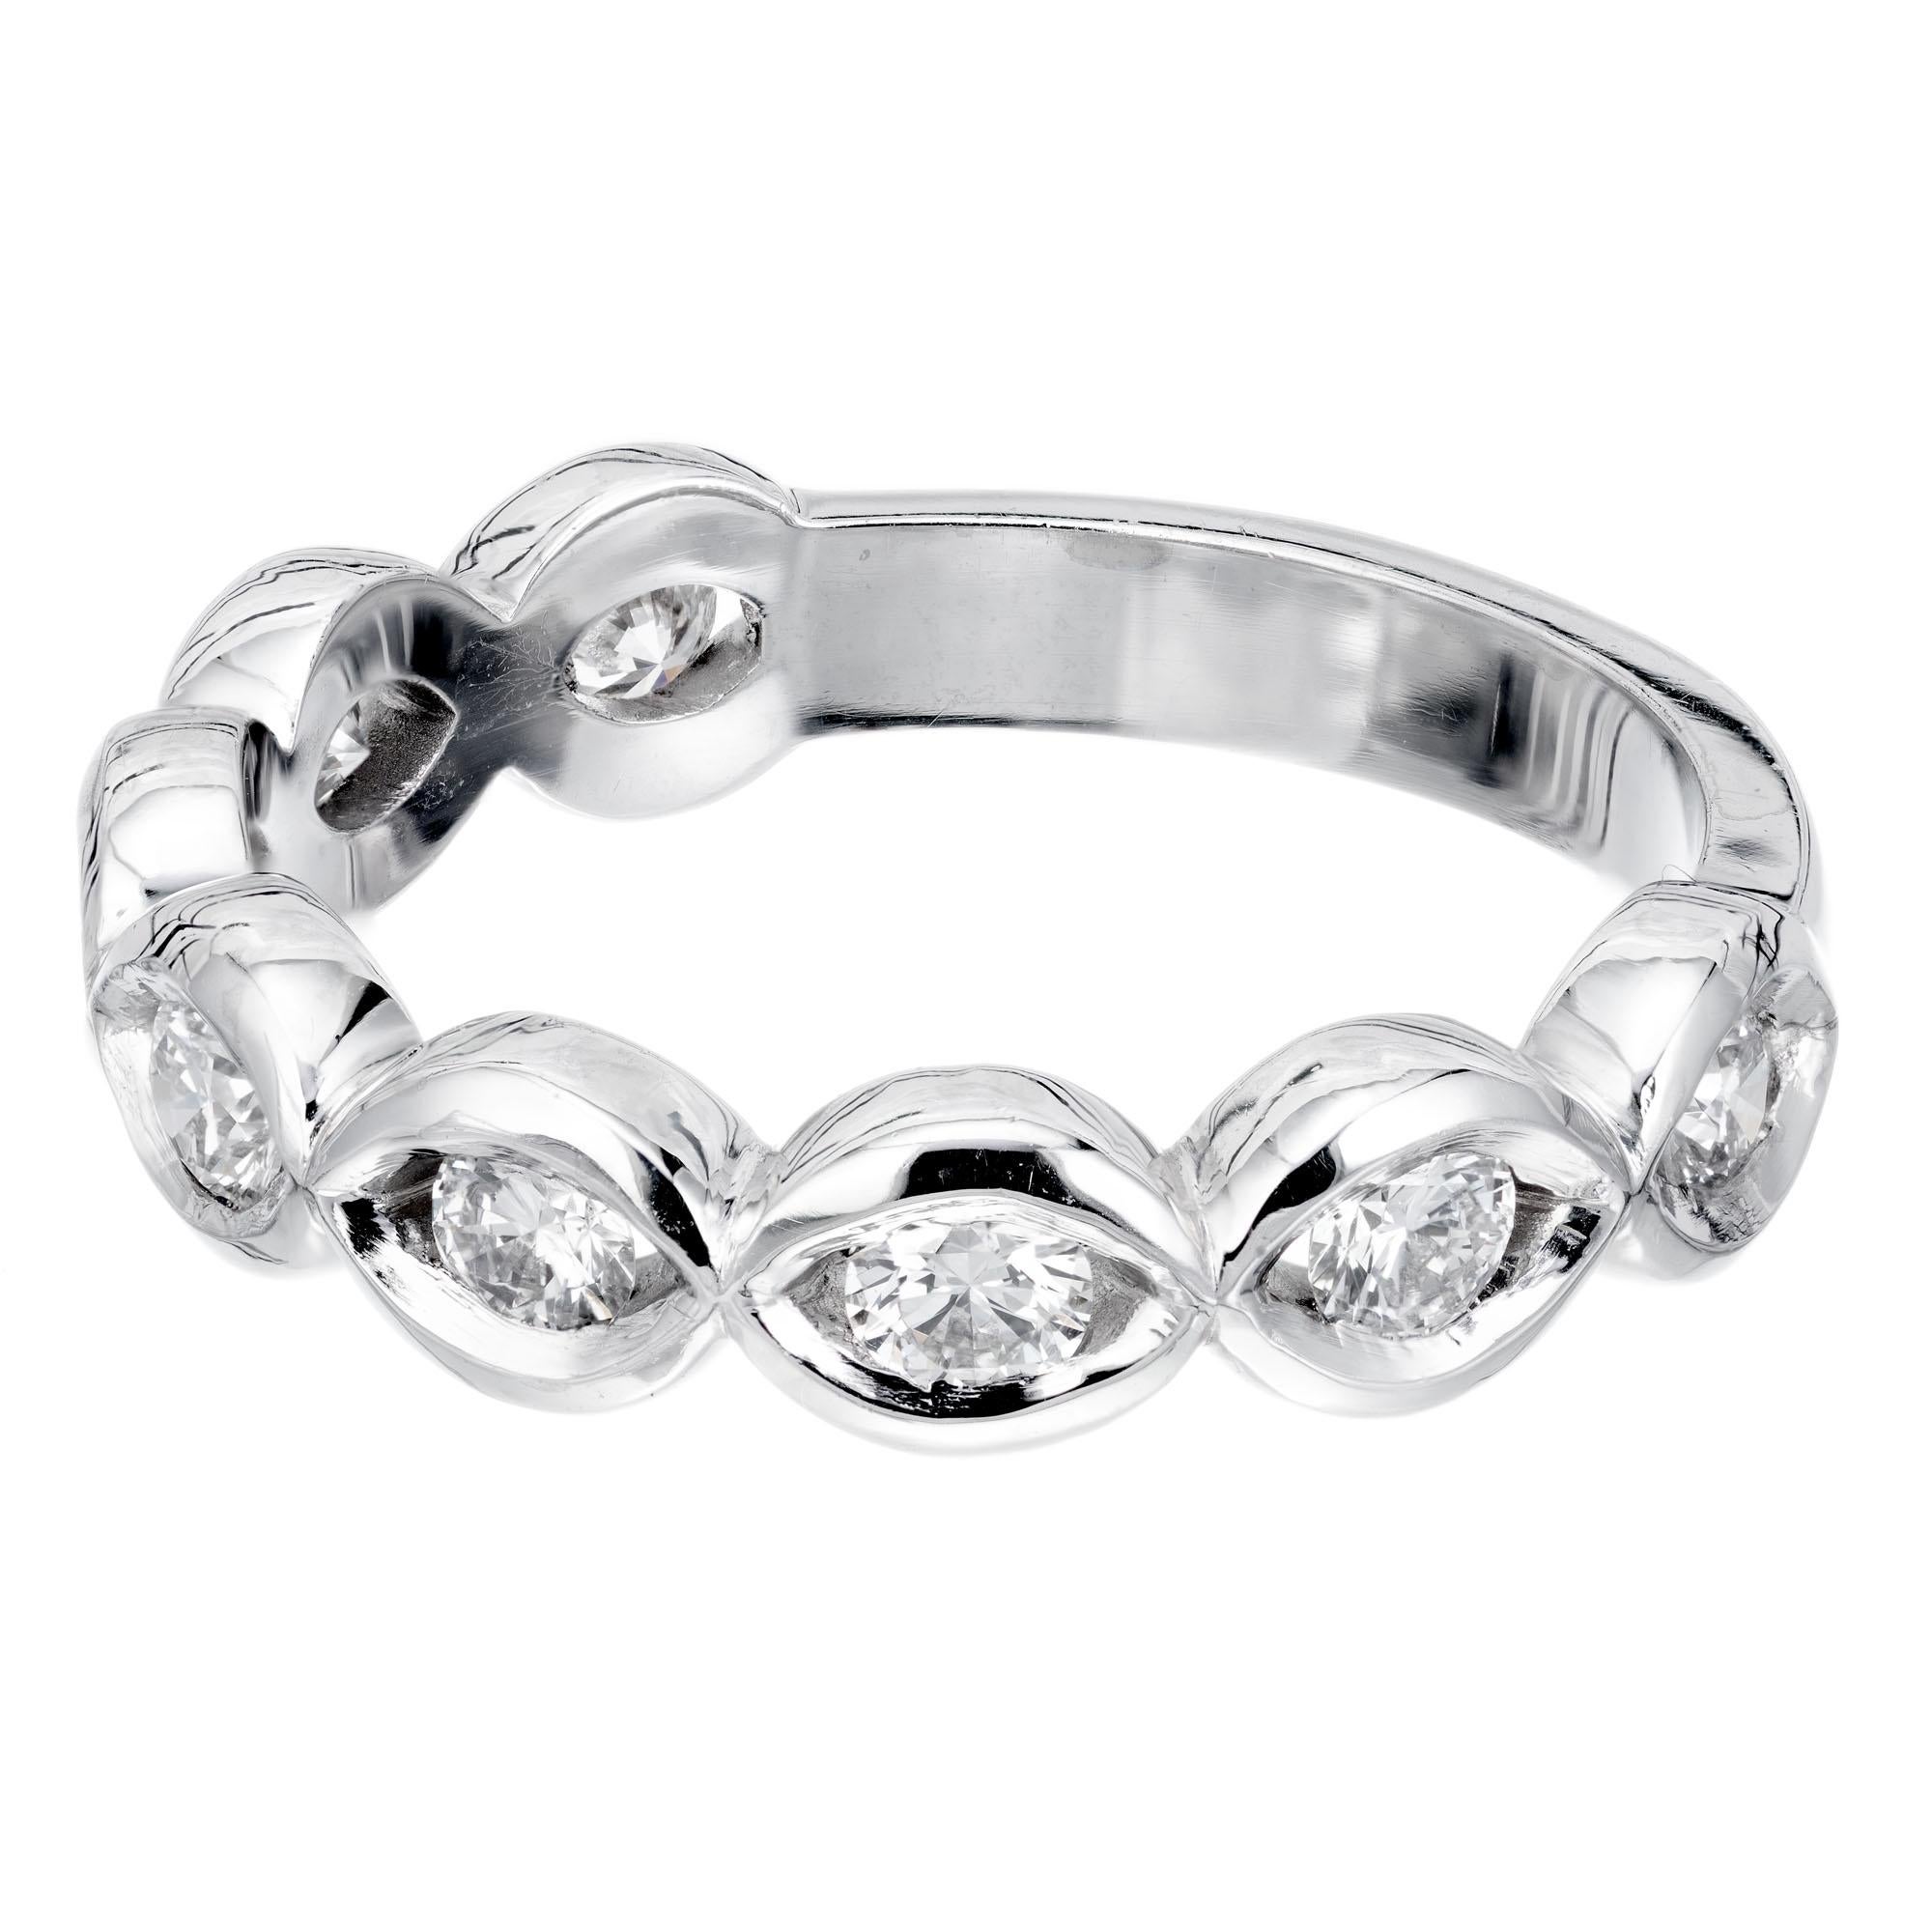 Infinity design diamond swirl wedding band. 8 Ideal full cut Diamonds in a platinum swirl design setting. The Diamonds go ¾ of the way around to allow for sizing and wear. Created in the Peter Suchy Workshop.

8 round Ideal brilliant cut Diamonds,